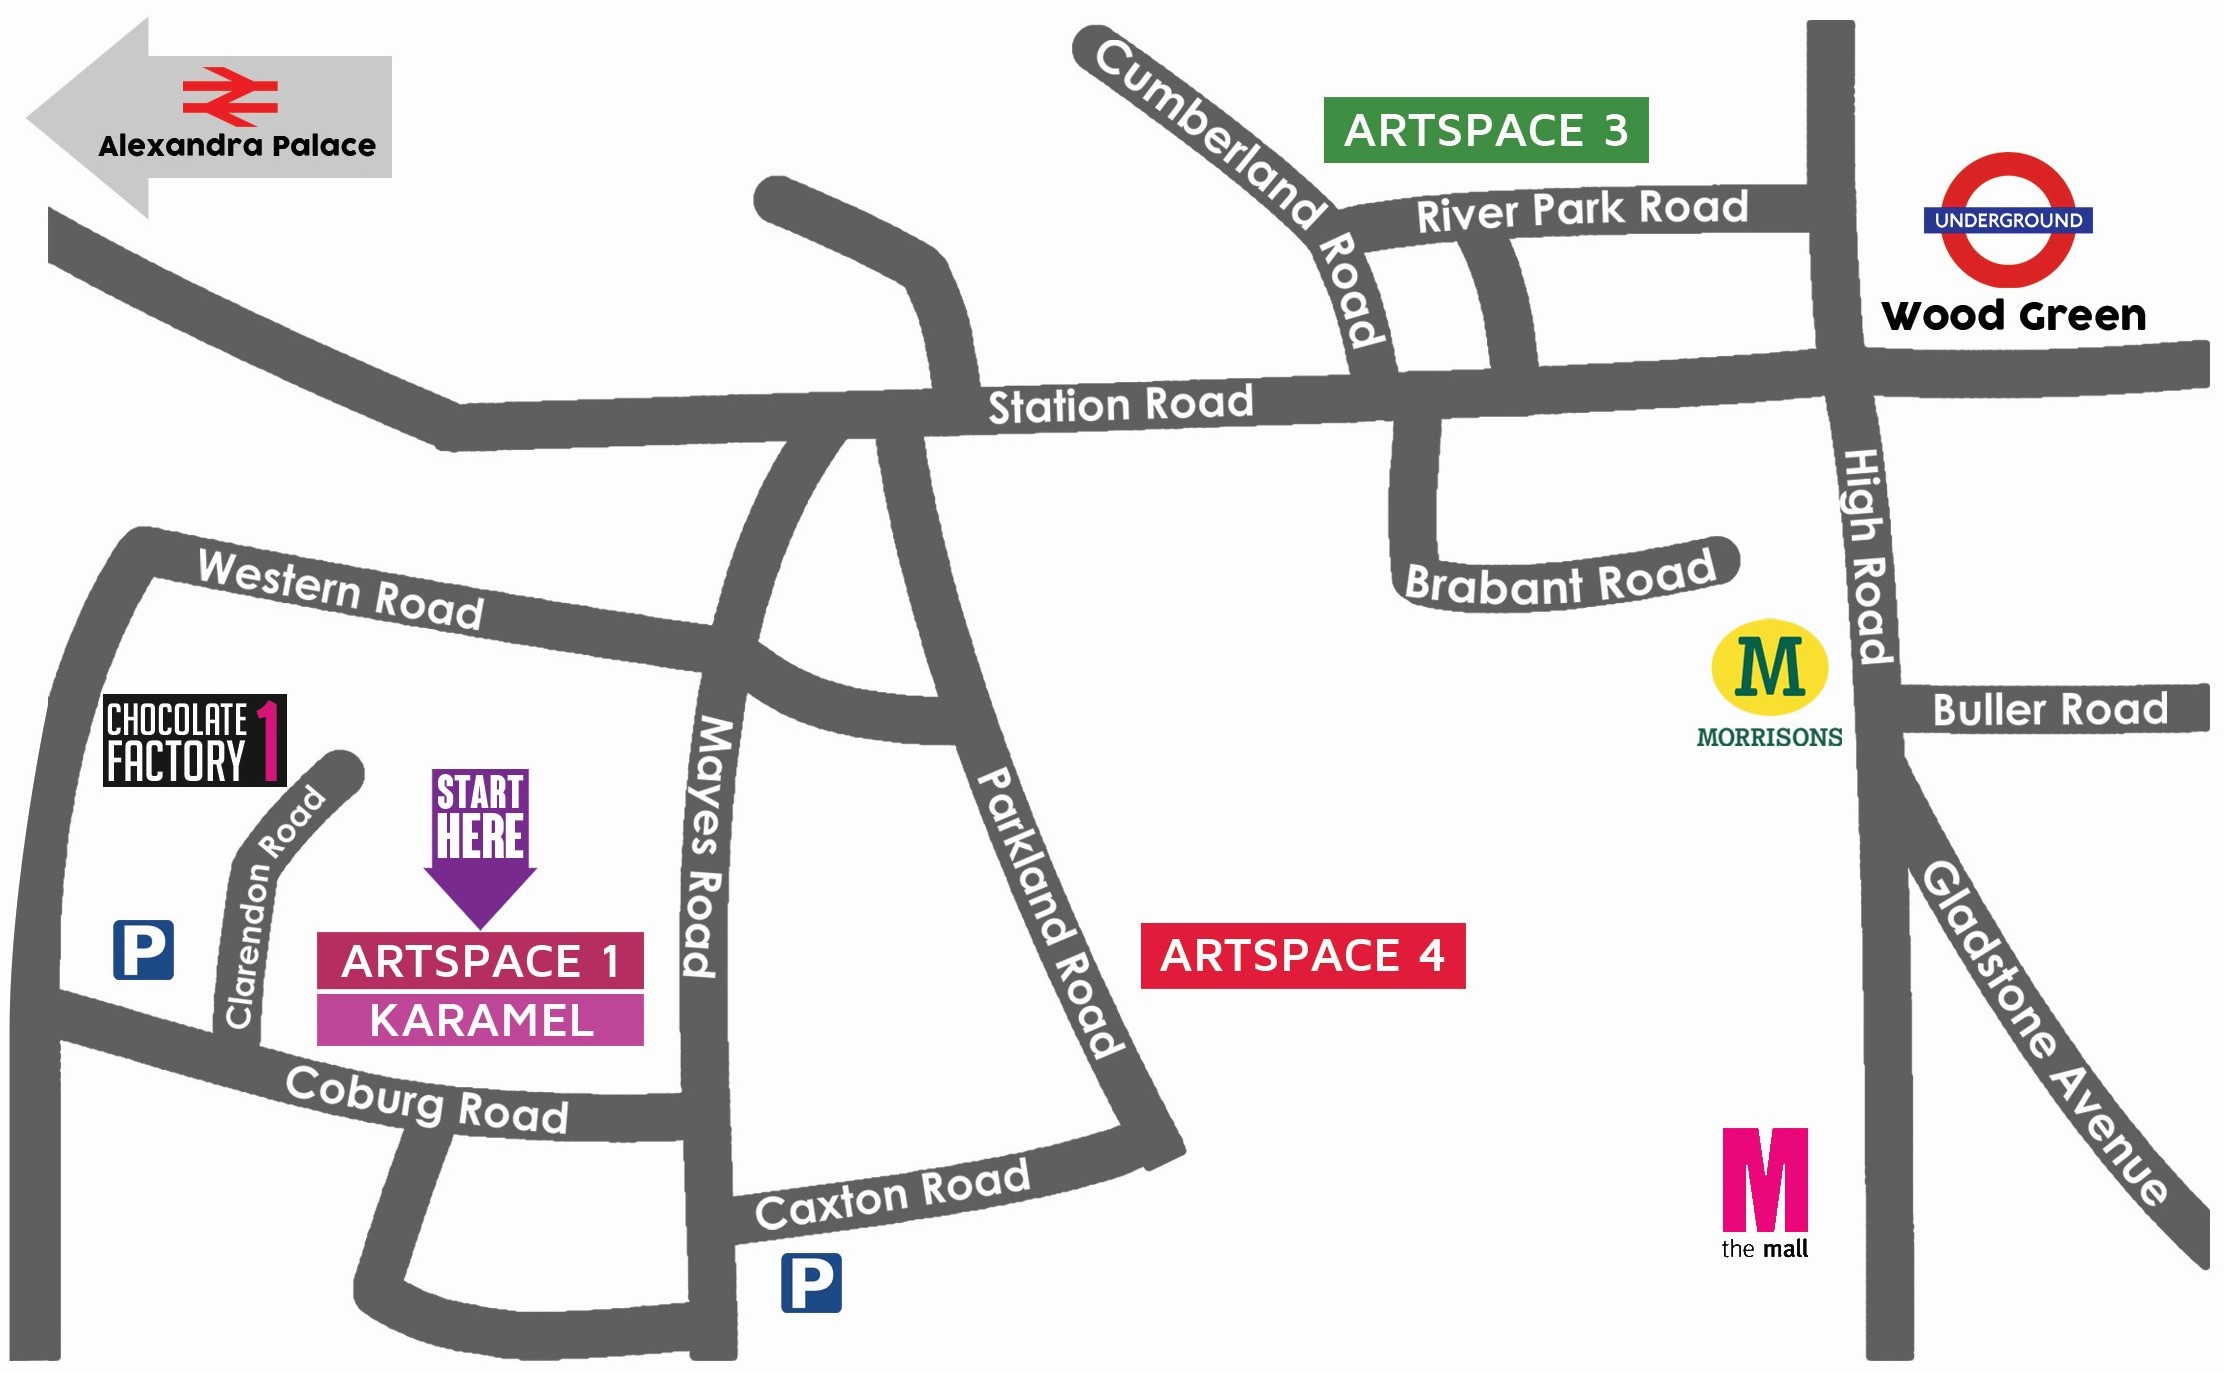 Map of Collage Artspaces in Open Studios 2018